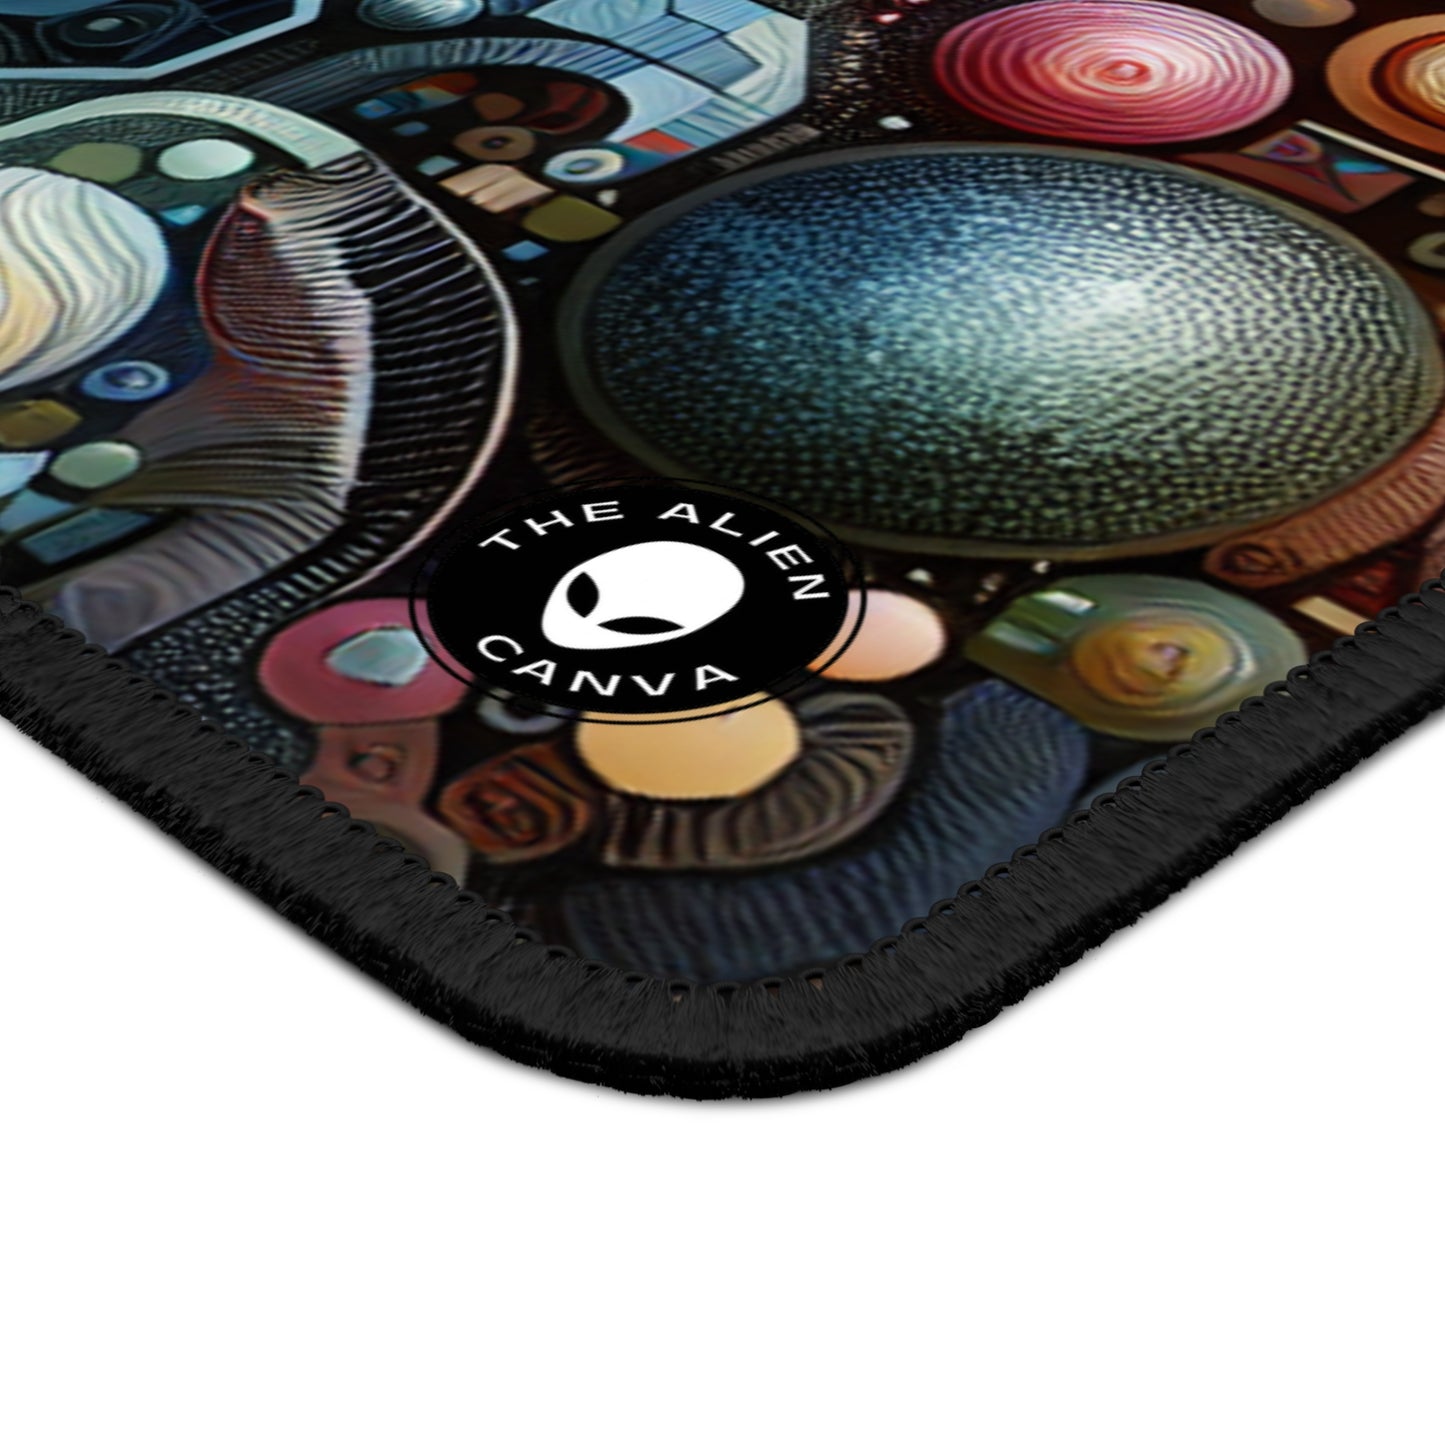 "Bio-Futurism: Butterfly Wing Inspired Art" - The Alien Gaming Mouse Pad Bio Art